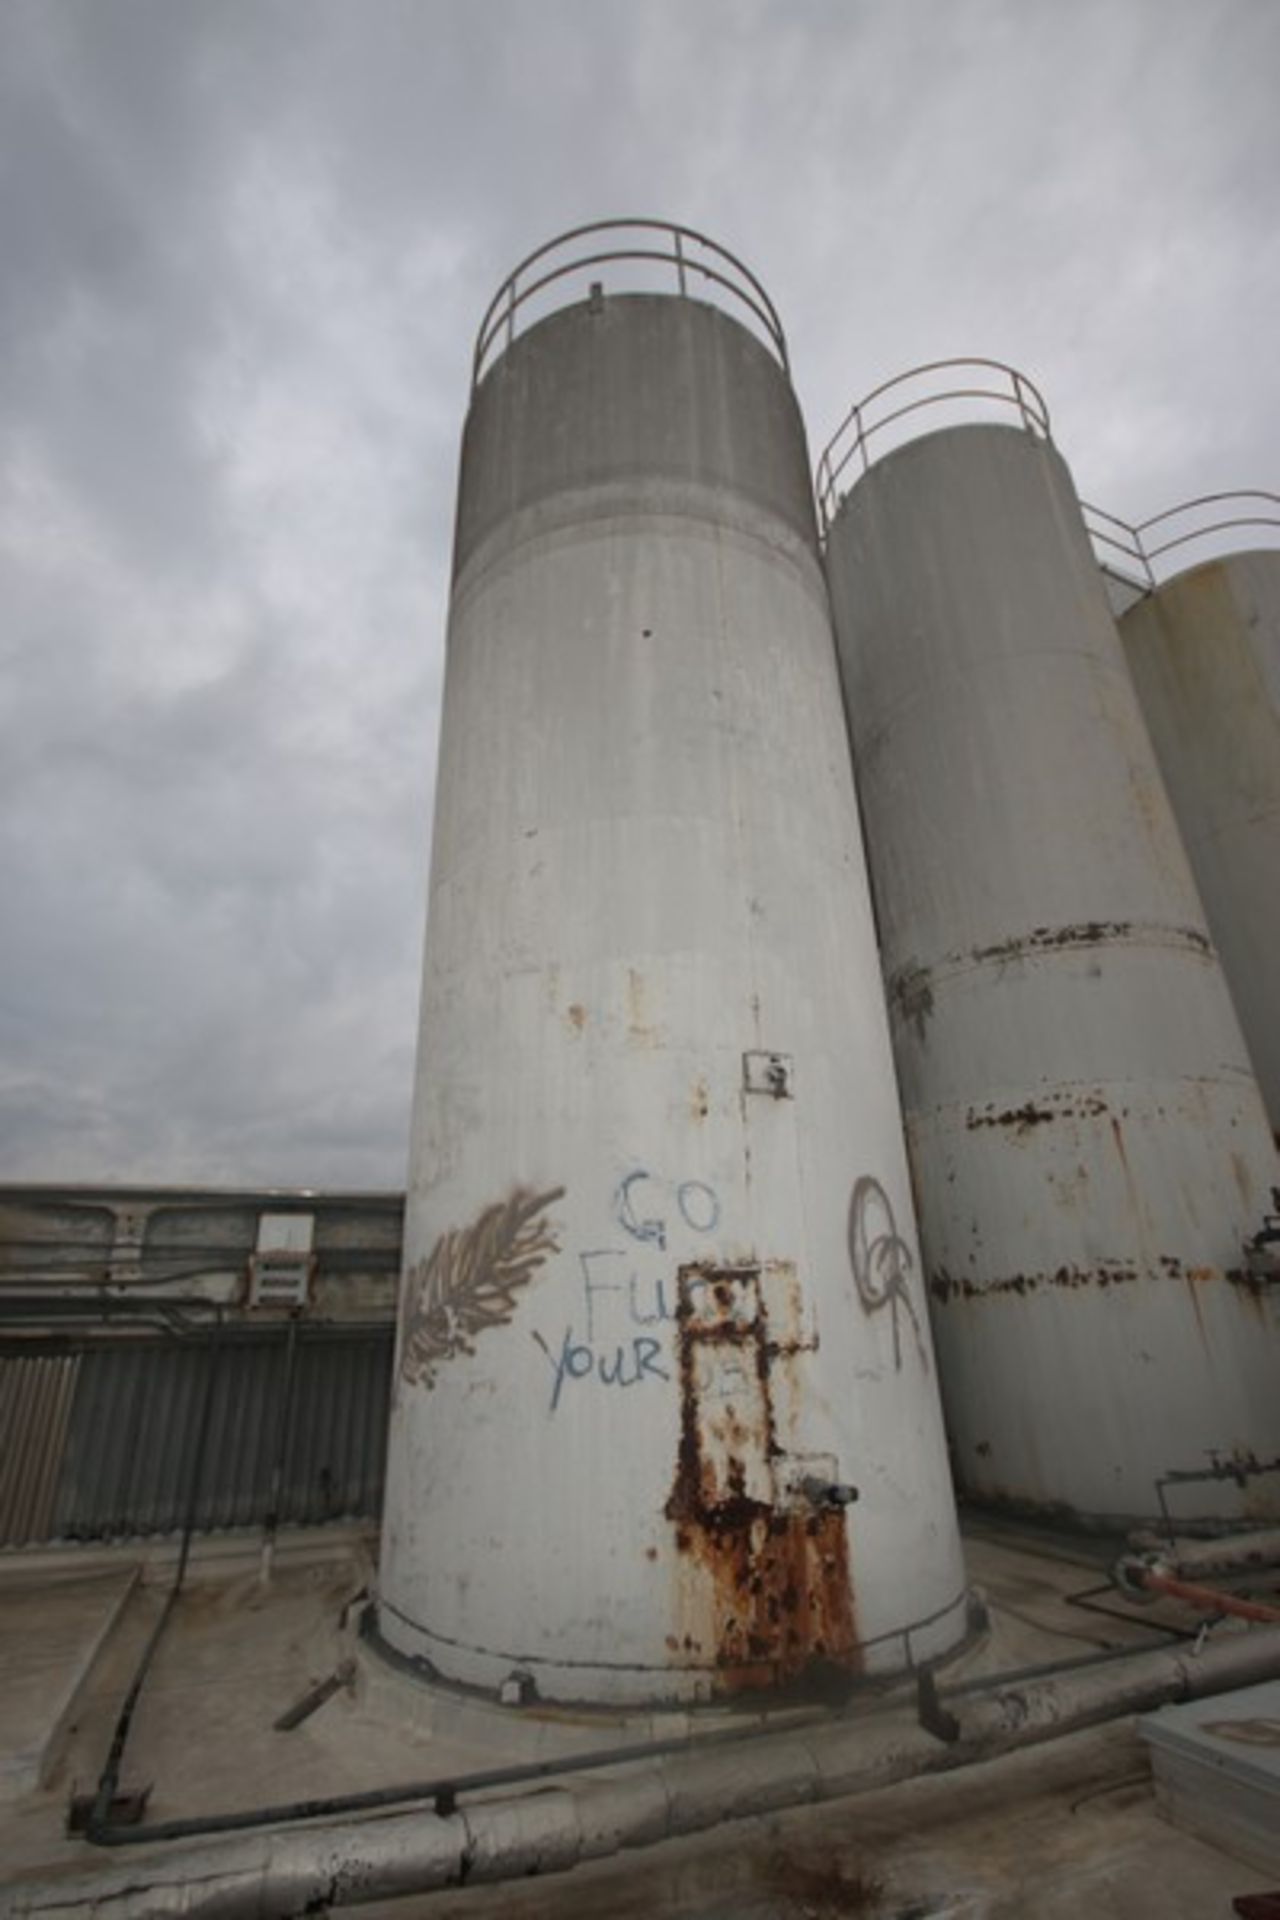 Aprox. 20,000 Gal. S/S Silo, Silo Dims.: Aprox. 11' Dia. x 30' Tall, with Inverted Dish Bottom, - Image 2 of 14